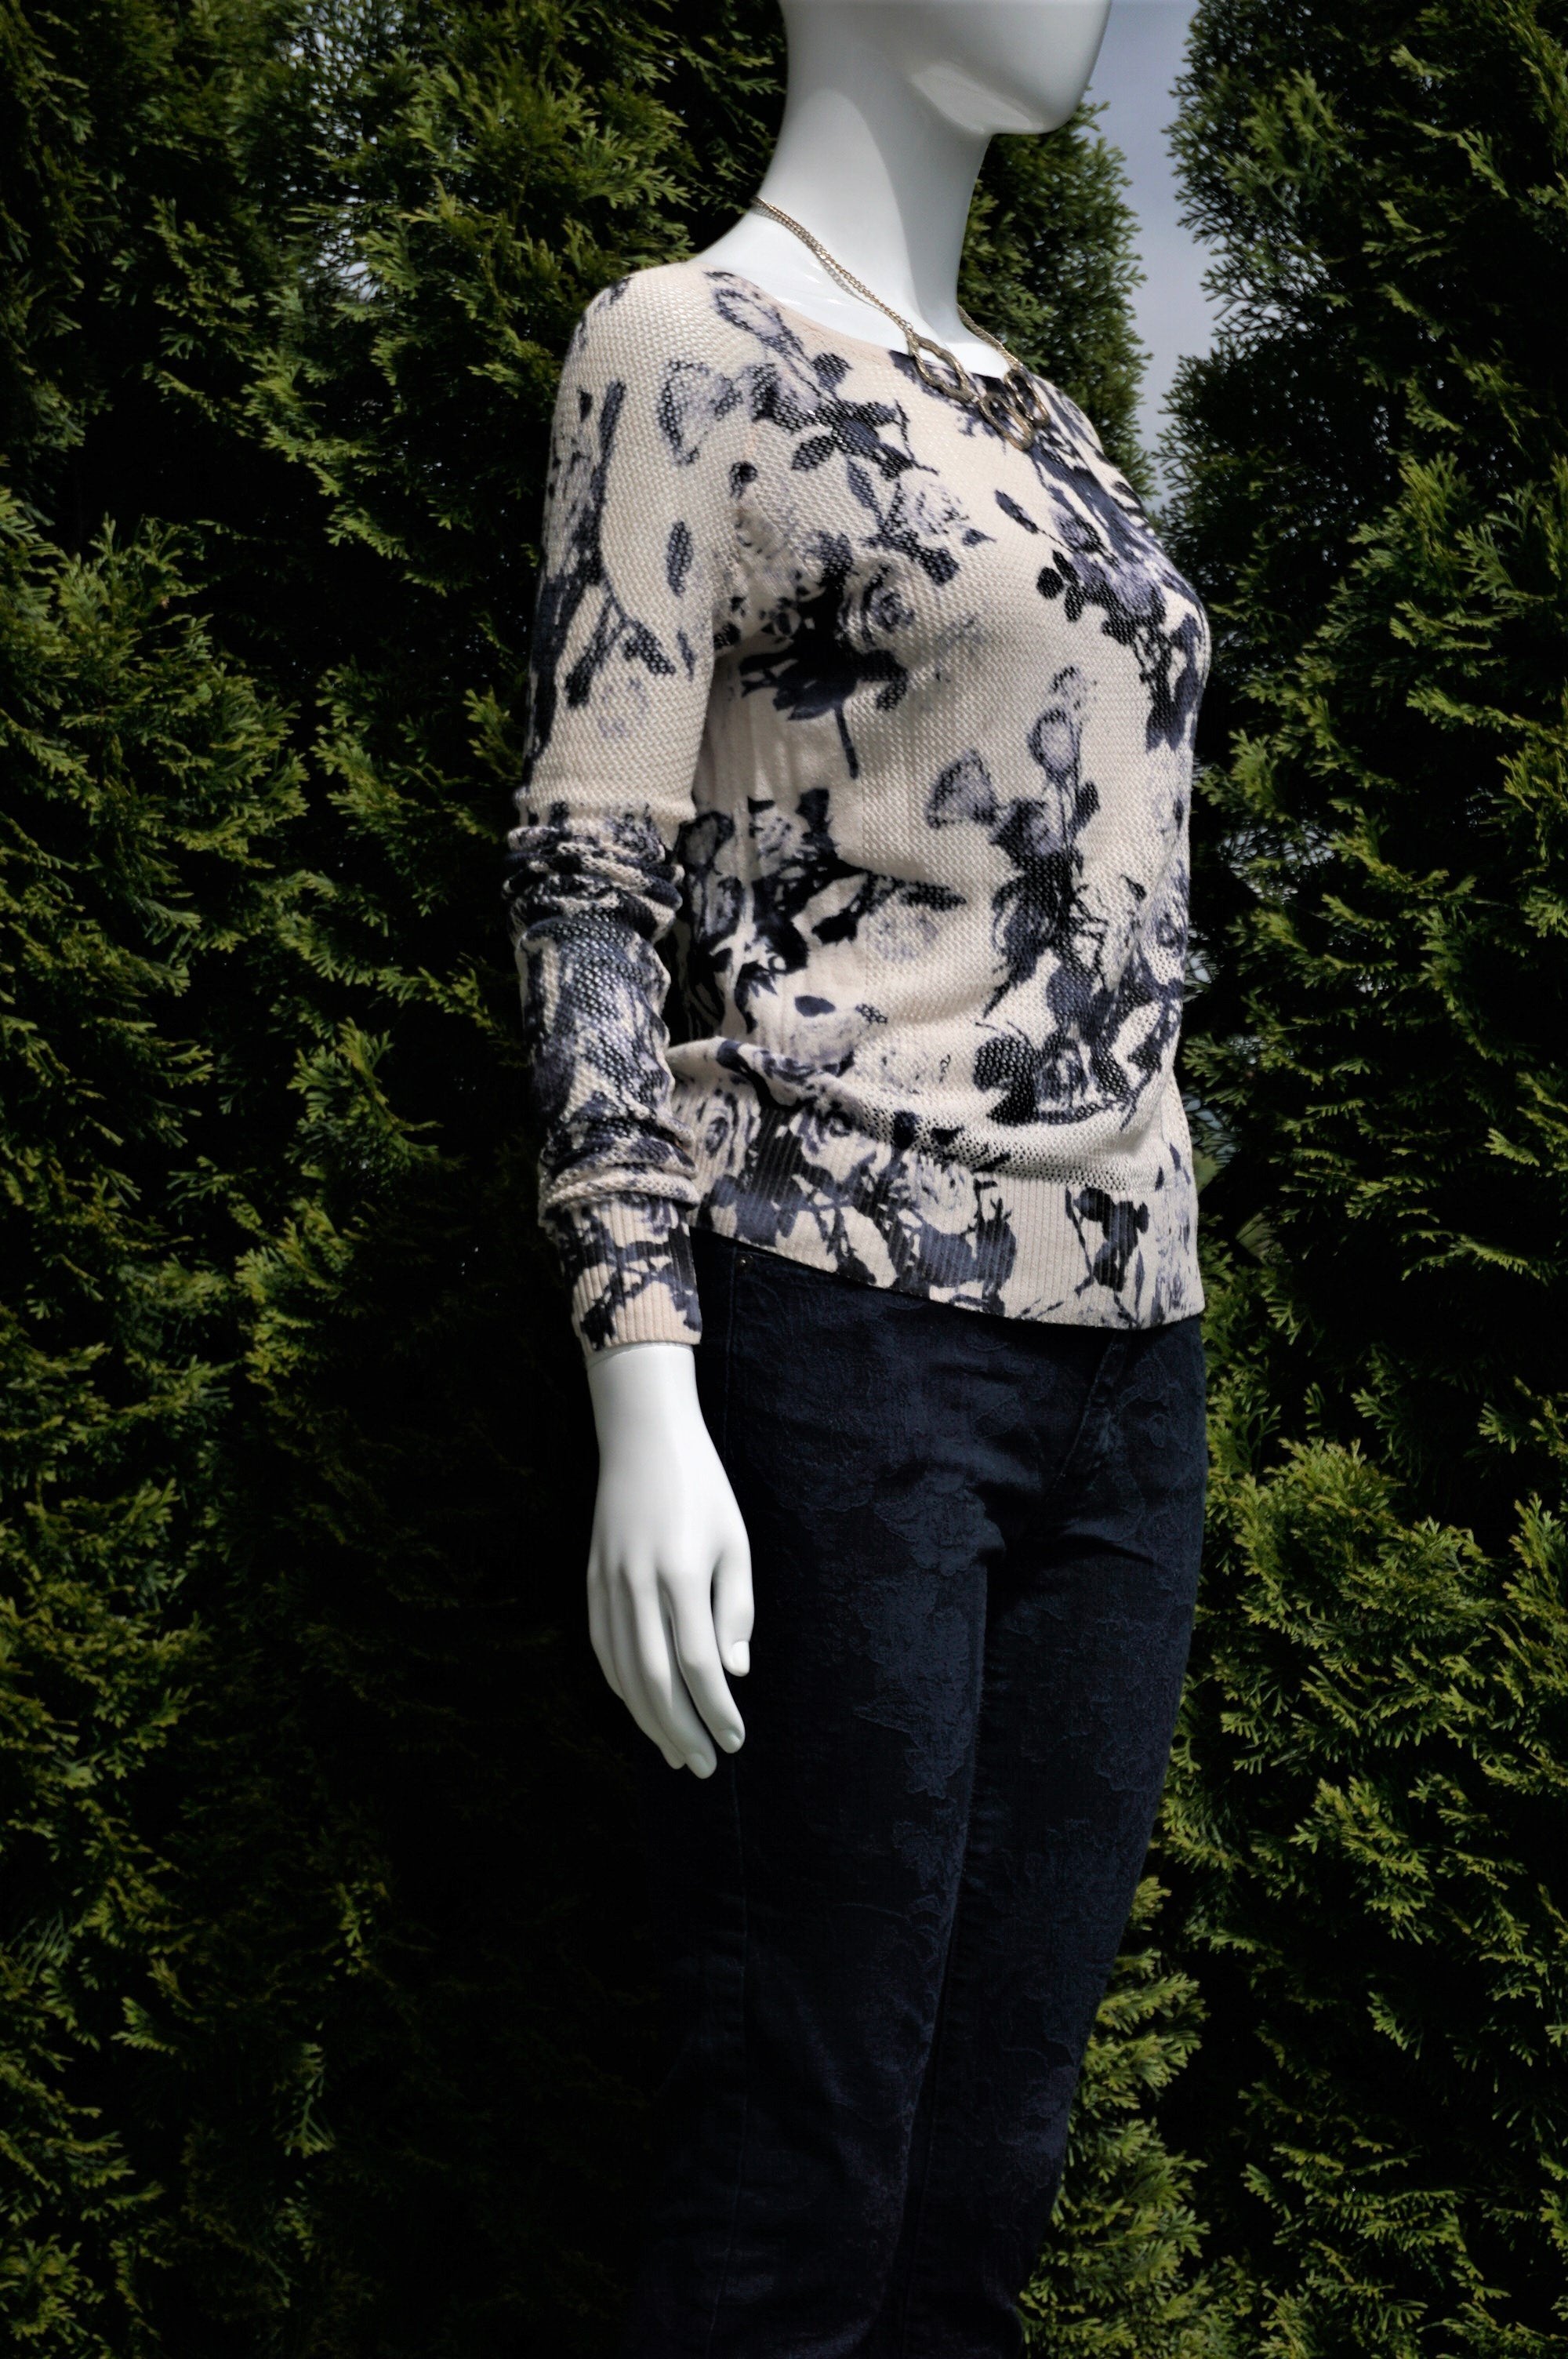 Silence & Noise Sweater Top, Thin sweater top with floral prints for your casual outing on a chily day., White, Blue, 100% cotton, women's Tops, women's White, Blue Tops, Silence & Noise women's Tops, Urban Outfitter sweater top with sabrina neckline, floral sweater top, spring floral sabrina neck sweater